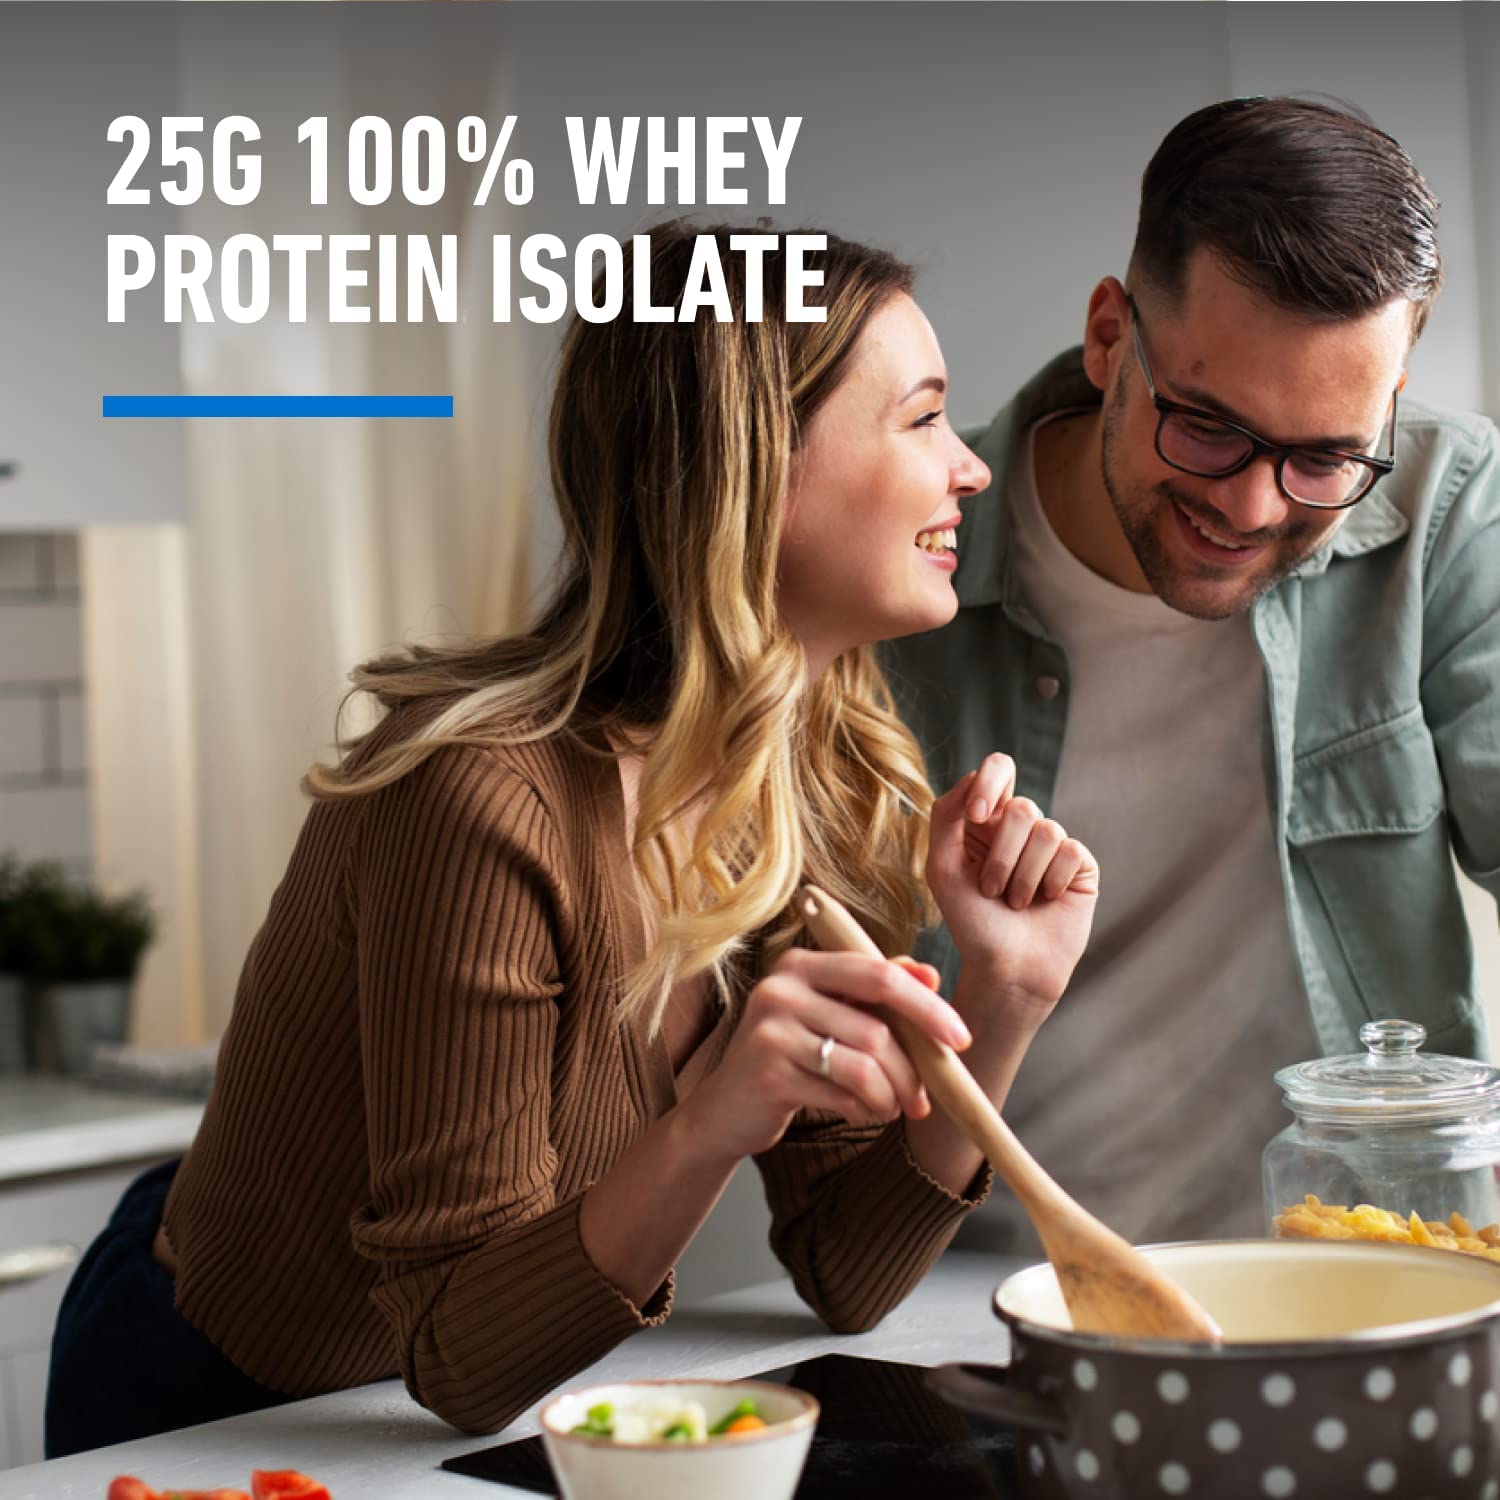 Isopure Protein Powder, Creamy Vanilla Whey Isolate with Vitamin C & Zinc for Immune Support, 25g Protein, Zero Carb & Keto Friendly, 44 Servings, 3 Pounds (Packaging May Vary) : Health & Household